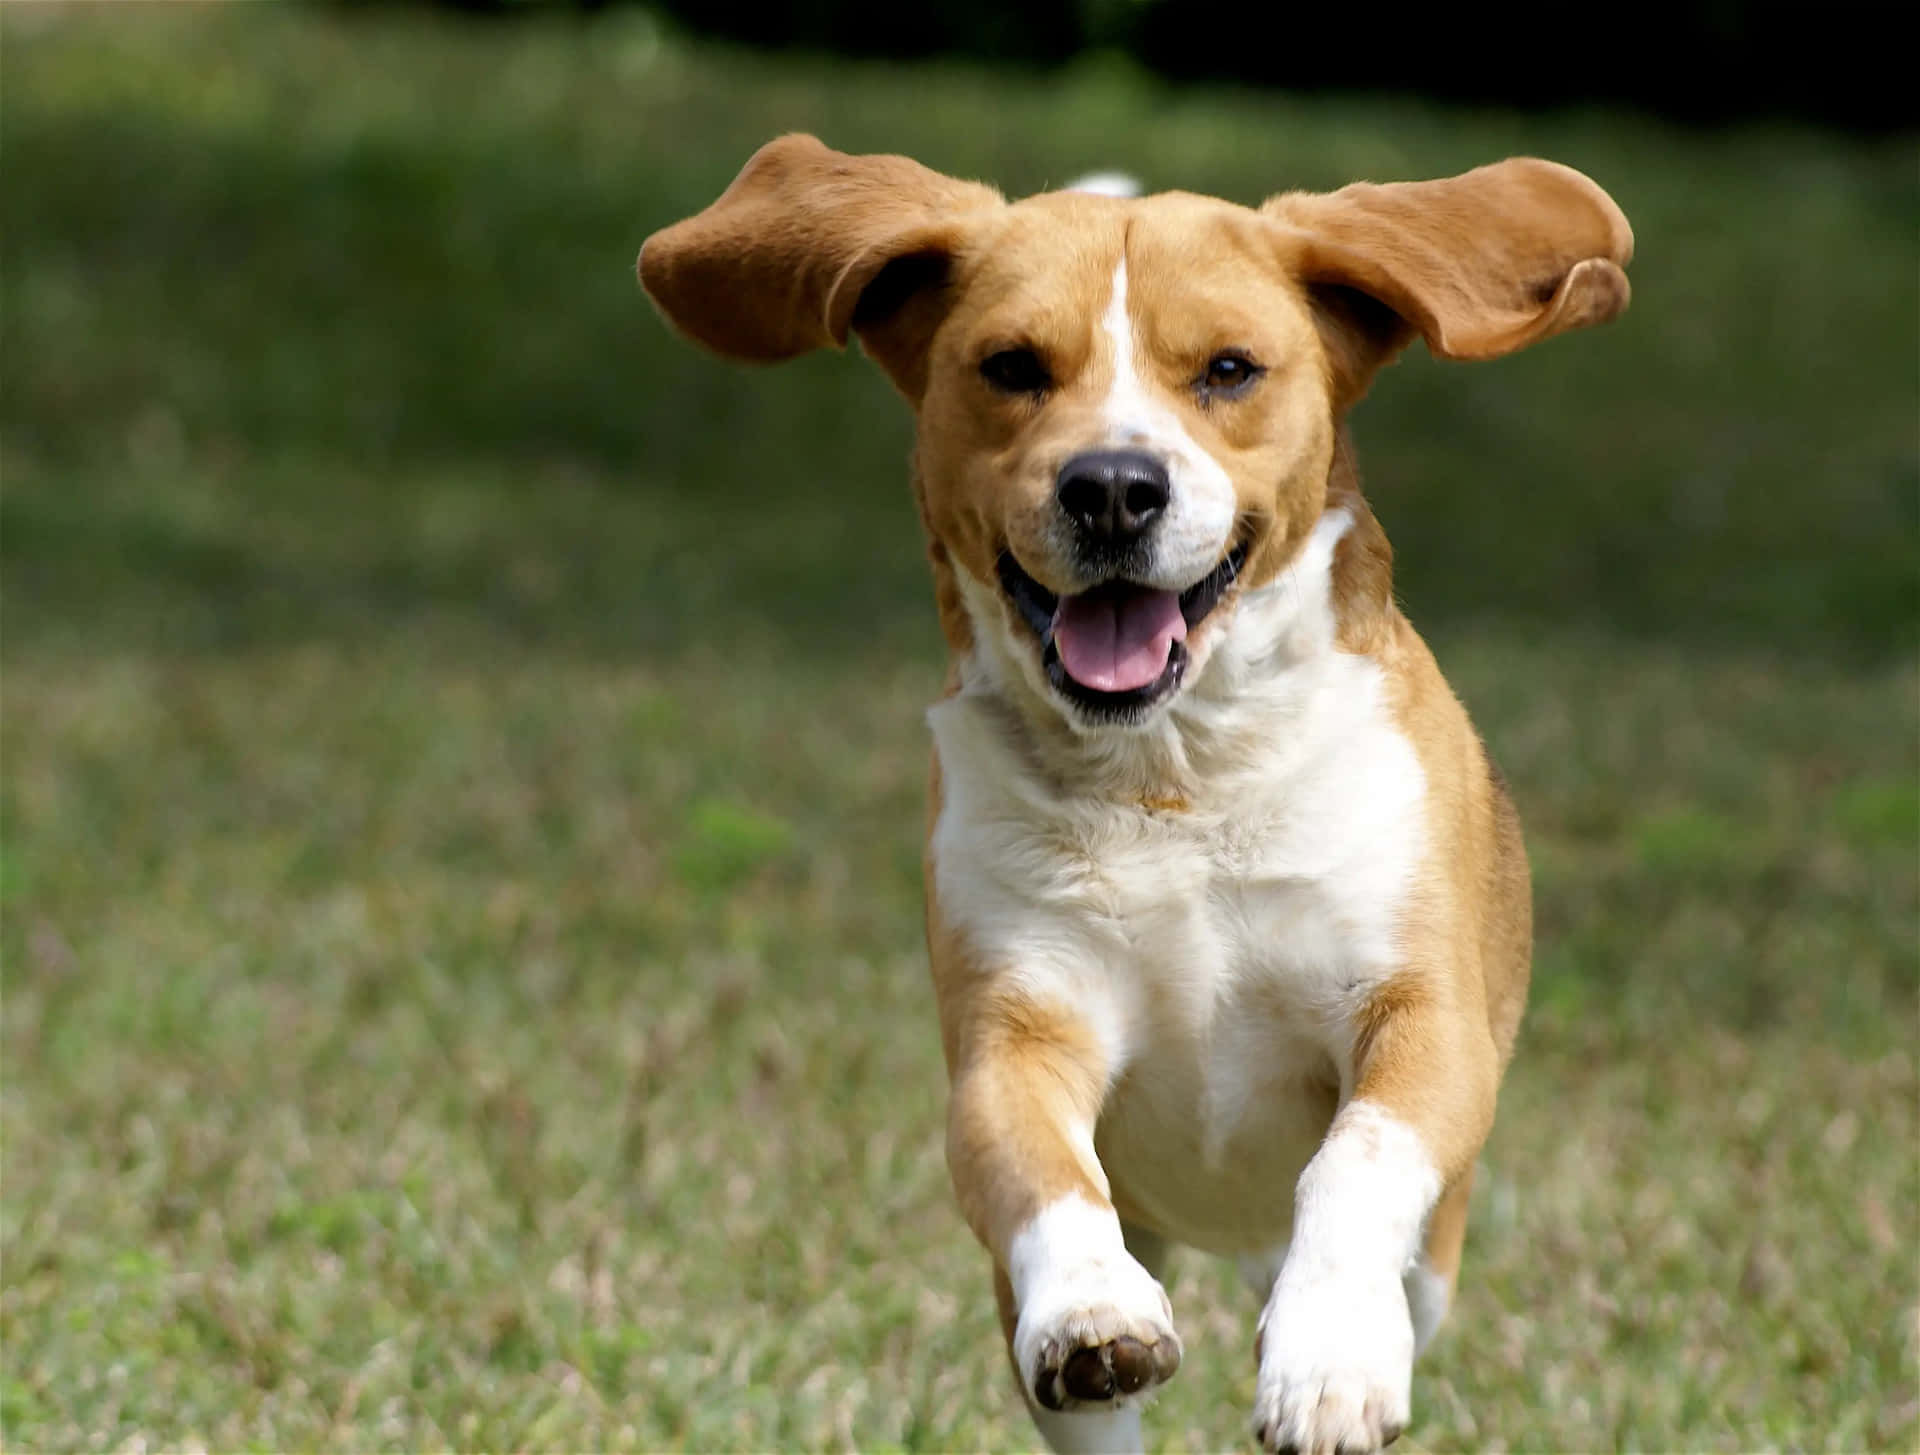 Running Beagle Dog Picture